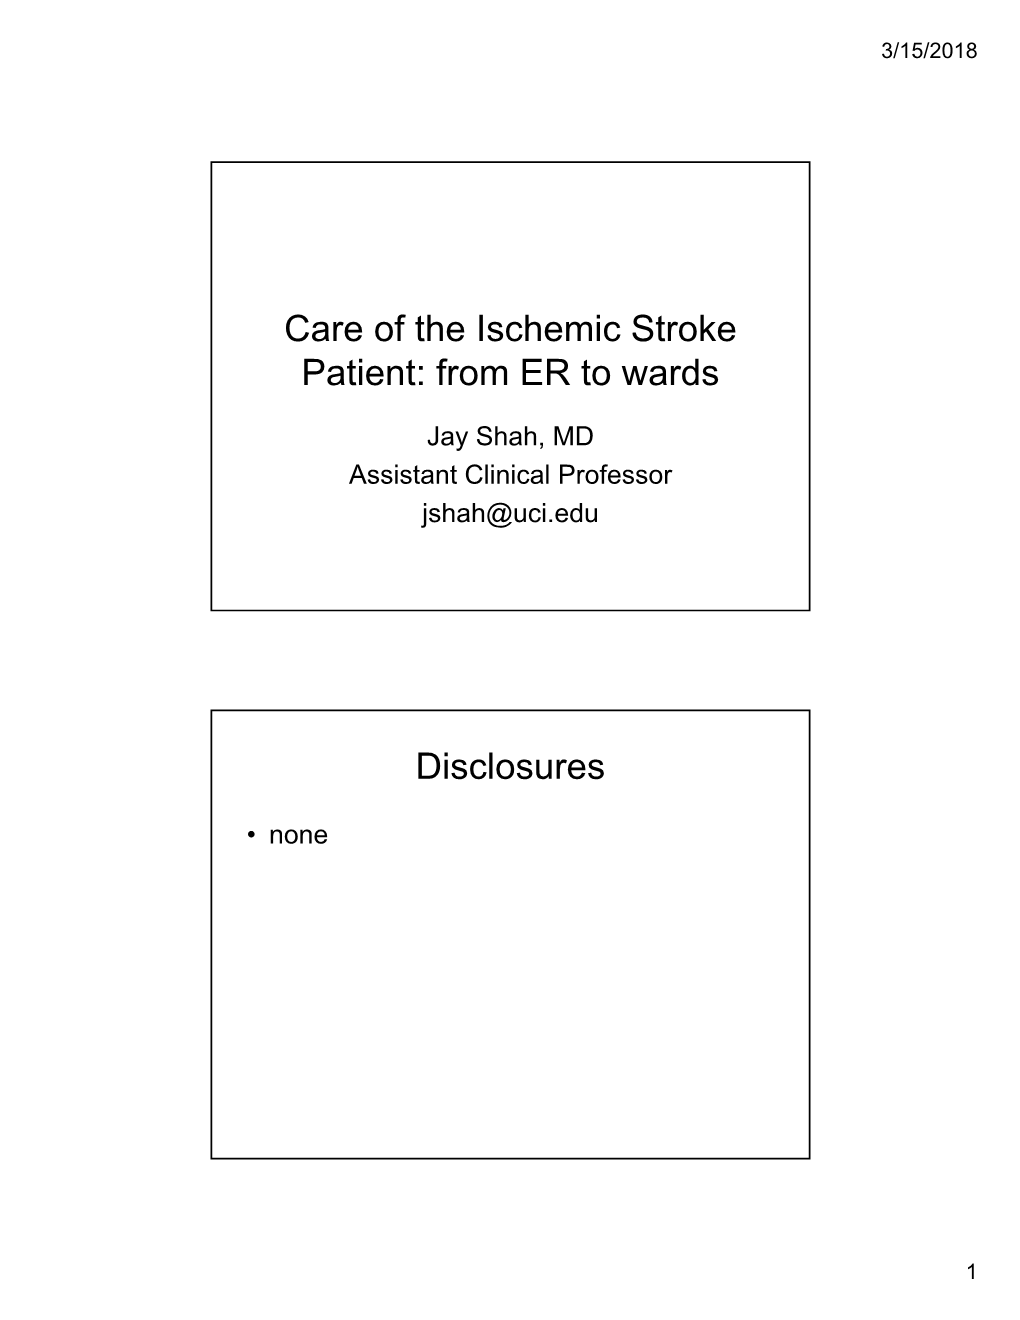 Care of the Ischemic Stroke Patient: from ER to Wards Disclosures